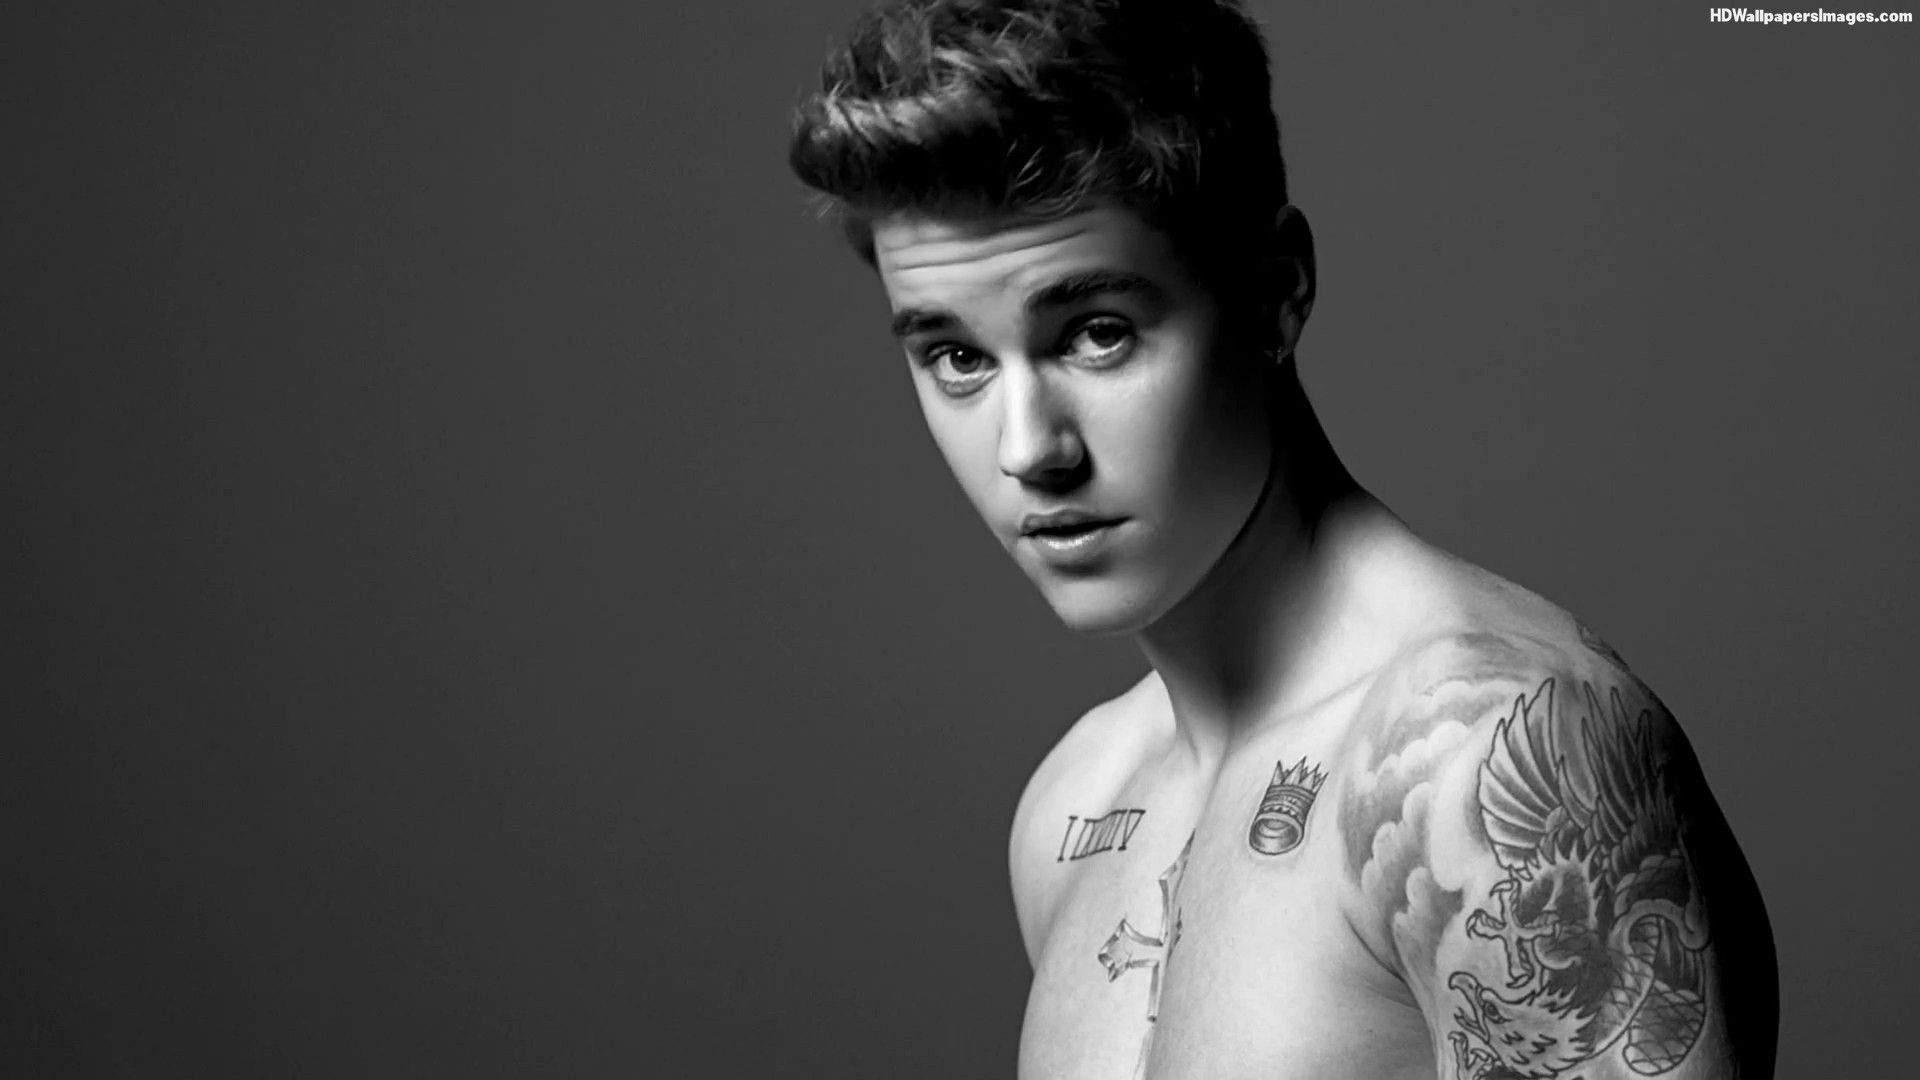 Justin Bieber Wallpapers High Resolution and Quality Download